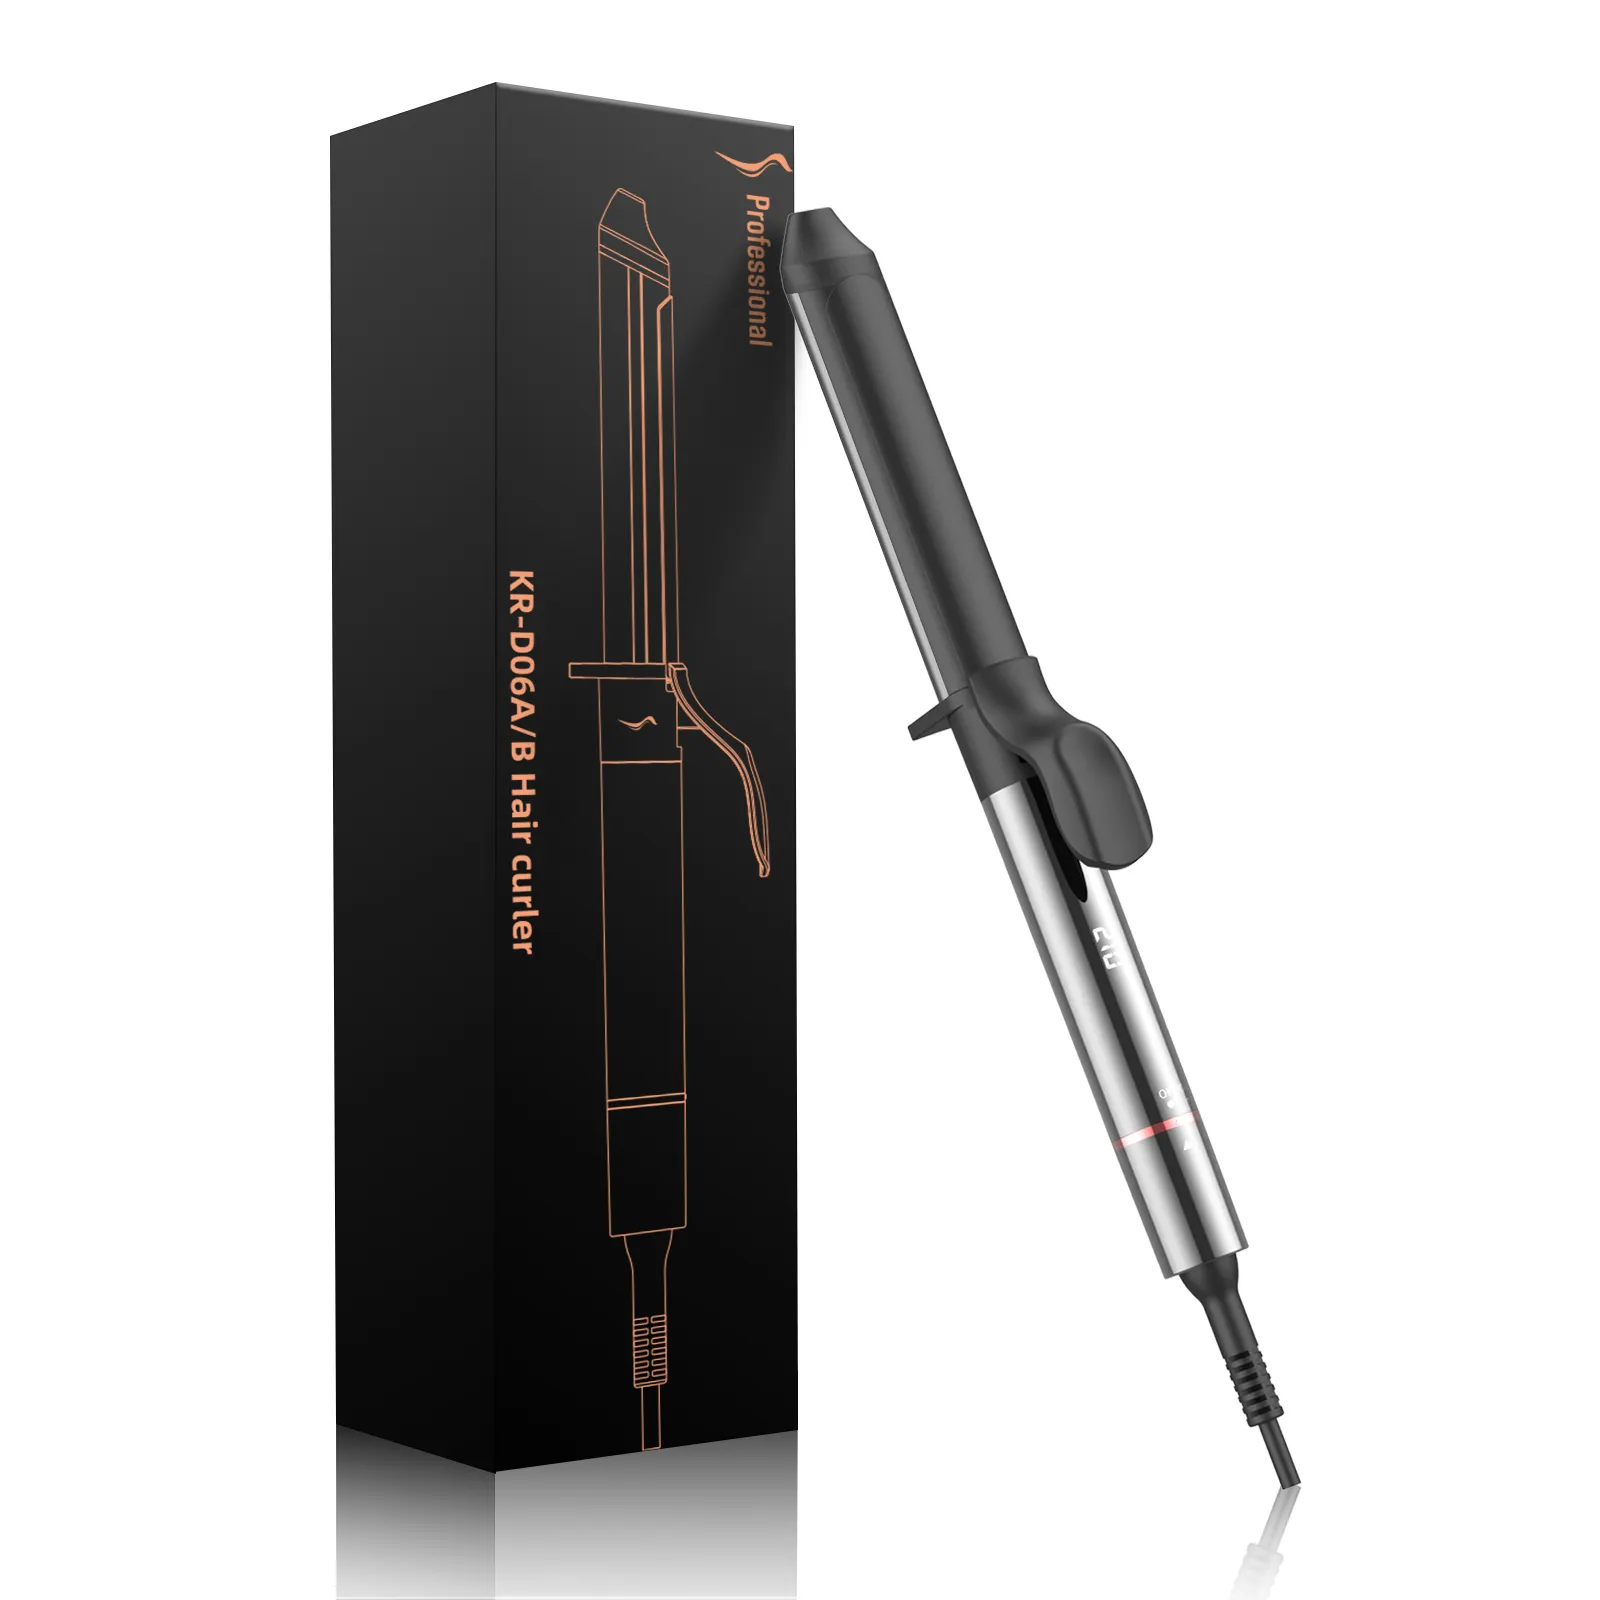 Professional Ceramic Tourmaline Barrel Curling Iron Wand And Hair Curler With Clip Good Price Cheap Packaging